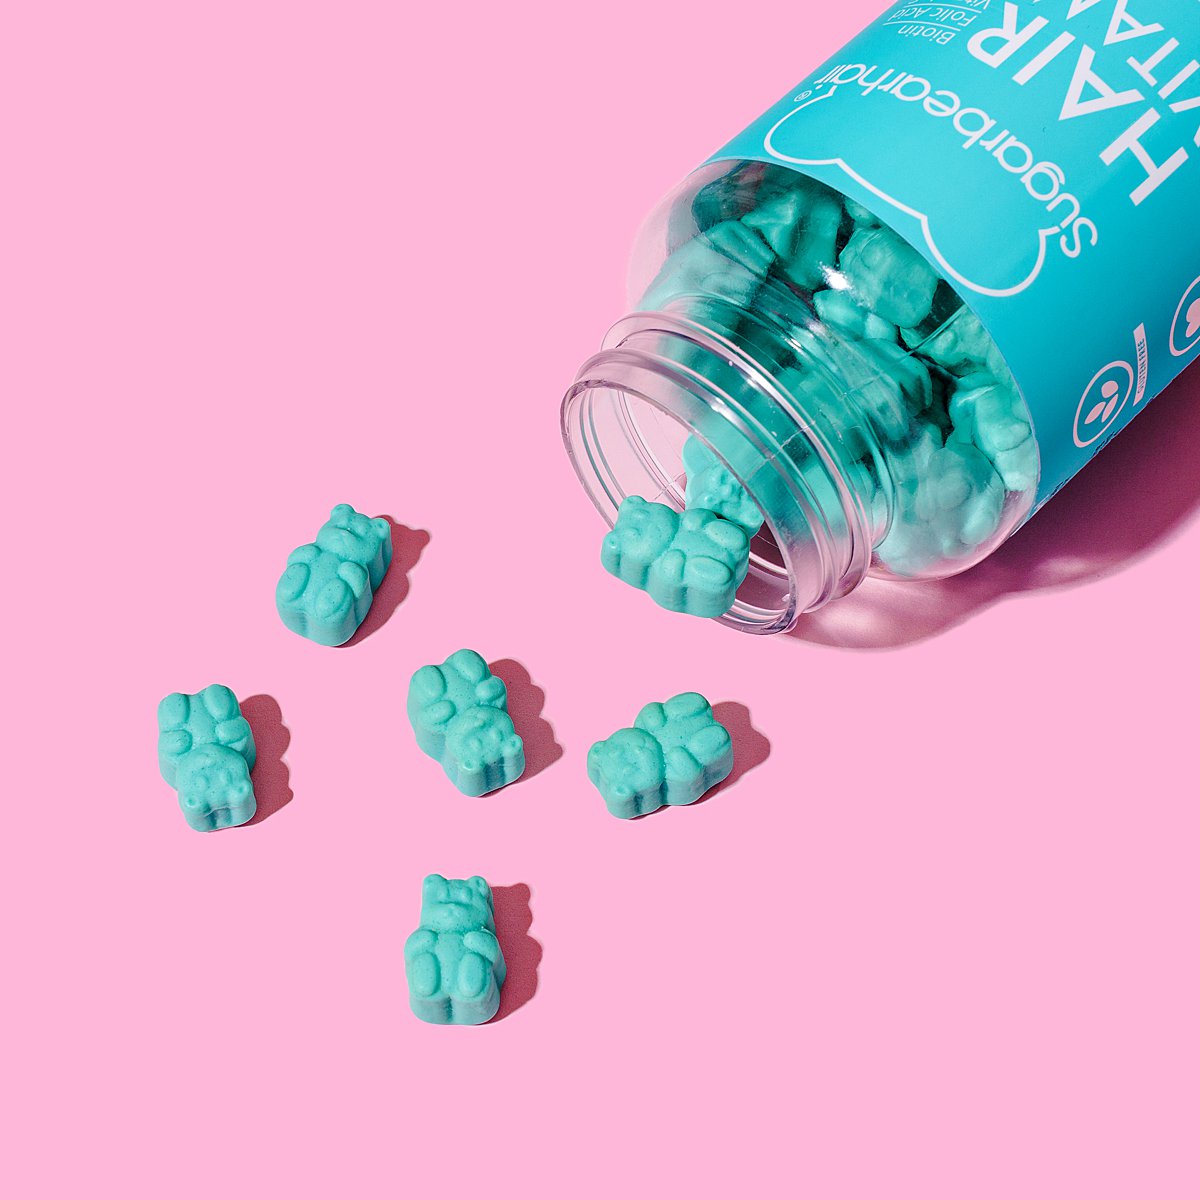 Cute colourful content creation for SugarBearHair vitamin supplements. Styled product stills photography by Marianne Taylor.